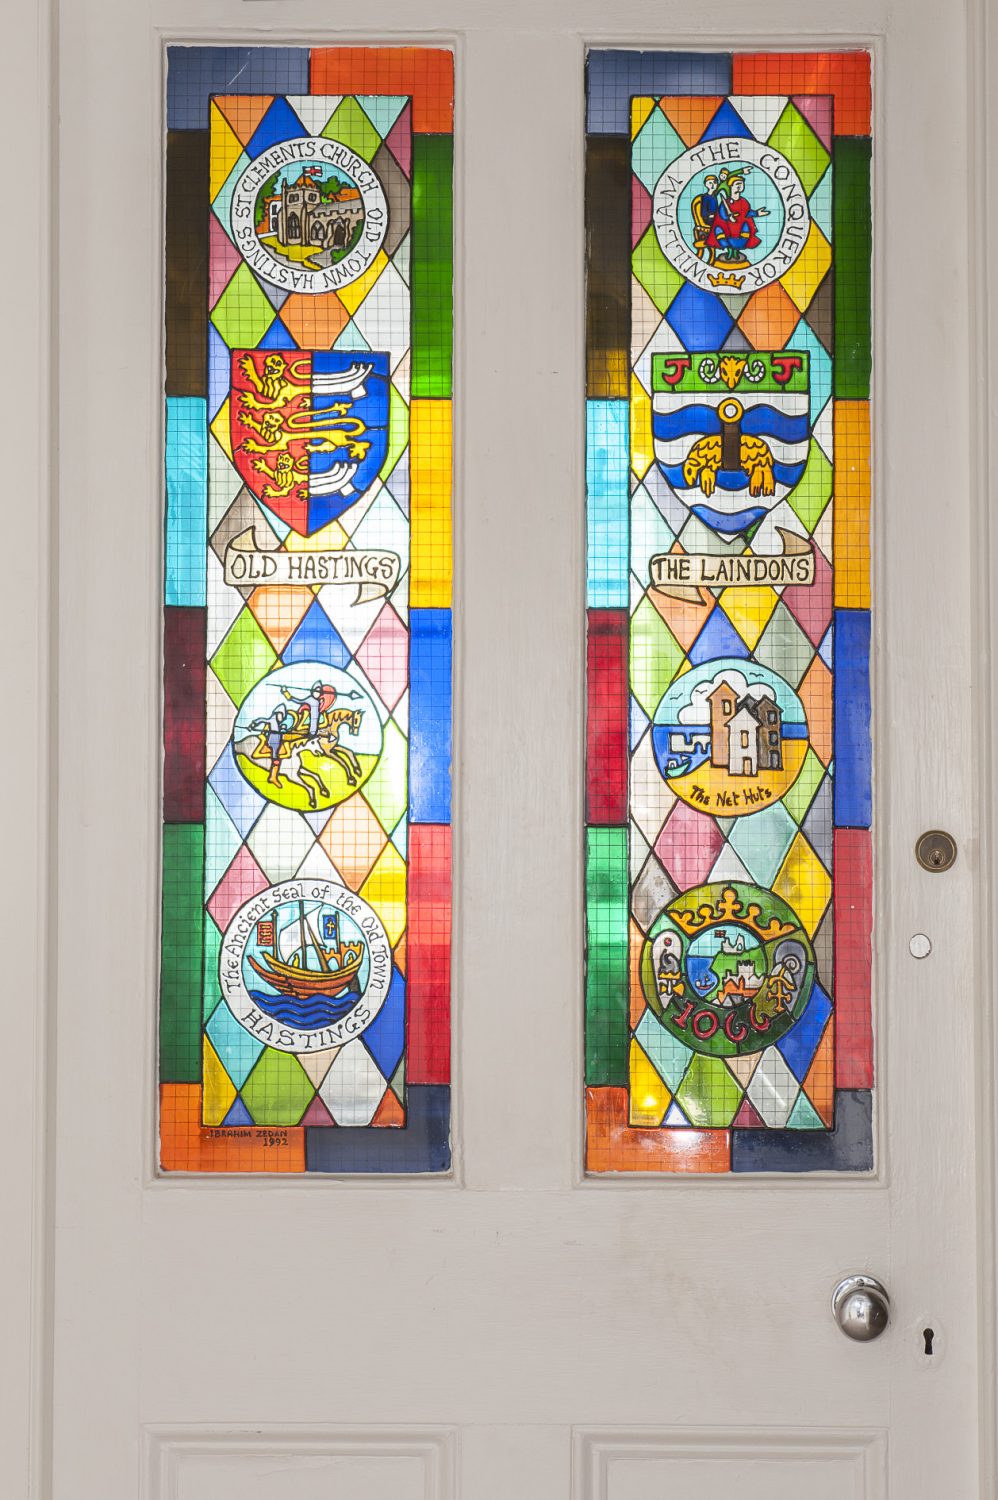 Personalised stained glass panels provide a powerful pop of colour in the corridor that separates the bedrooms from the drawing room and dining area